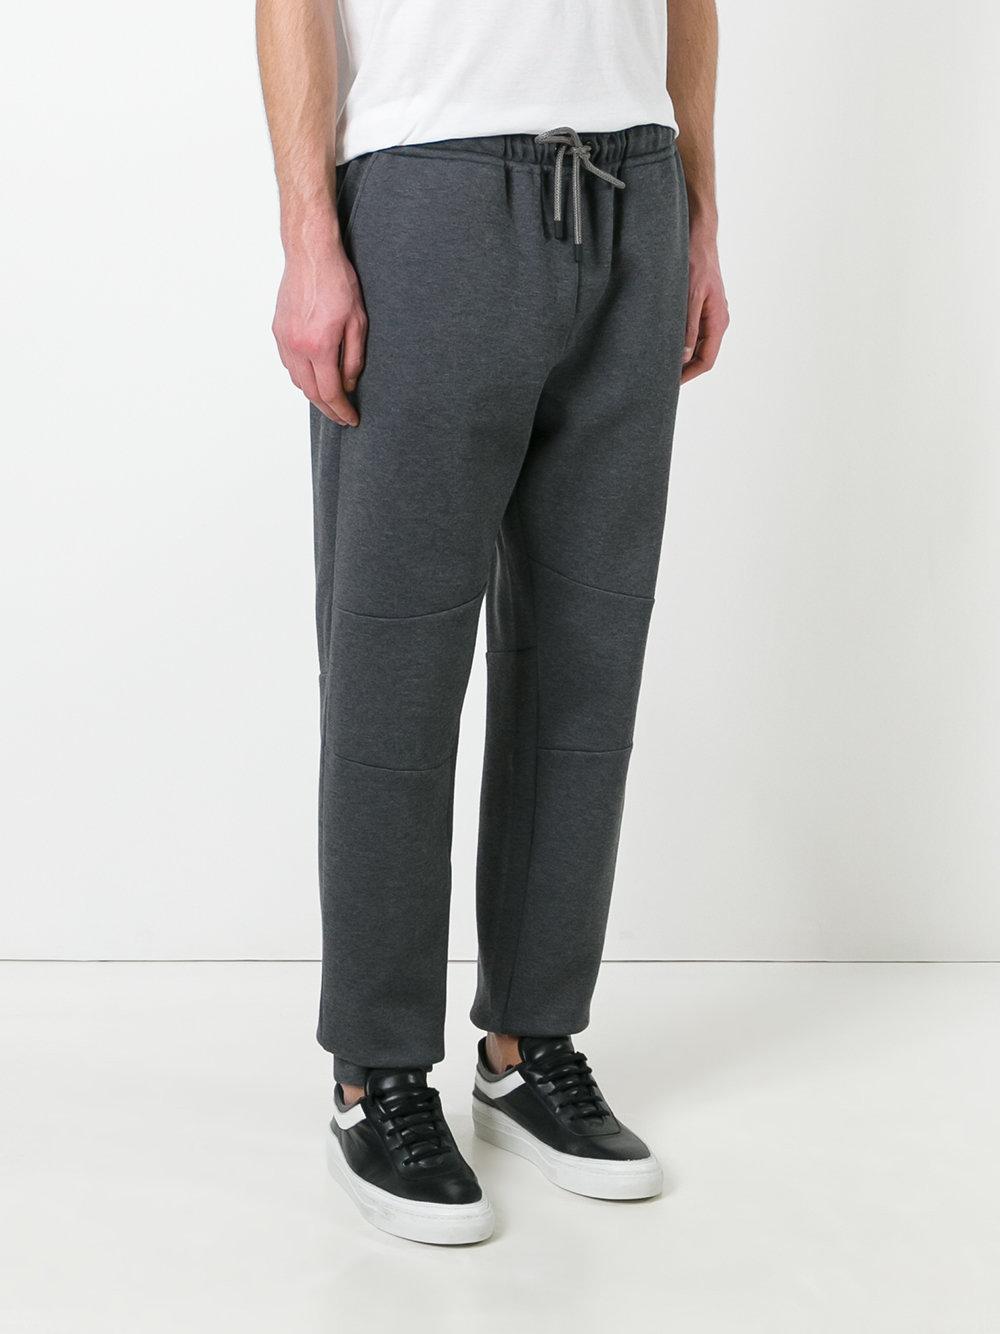 Lyst - Fendi Loose Fit Cuffed Joggers in Gray for Men